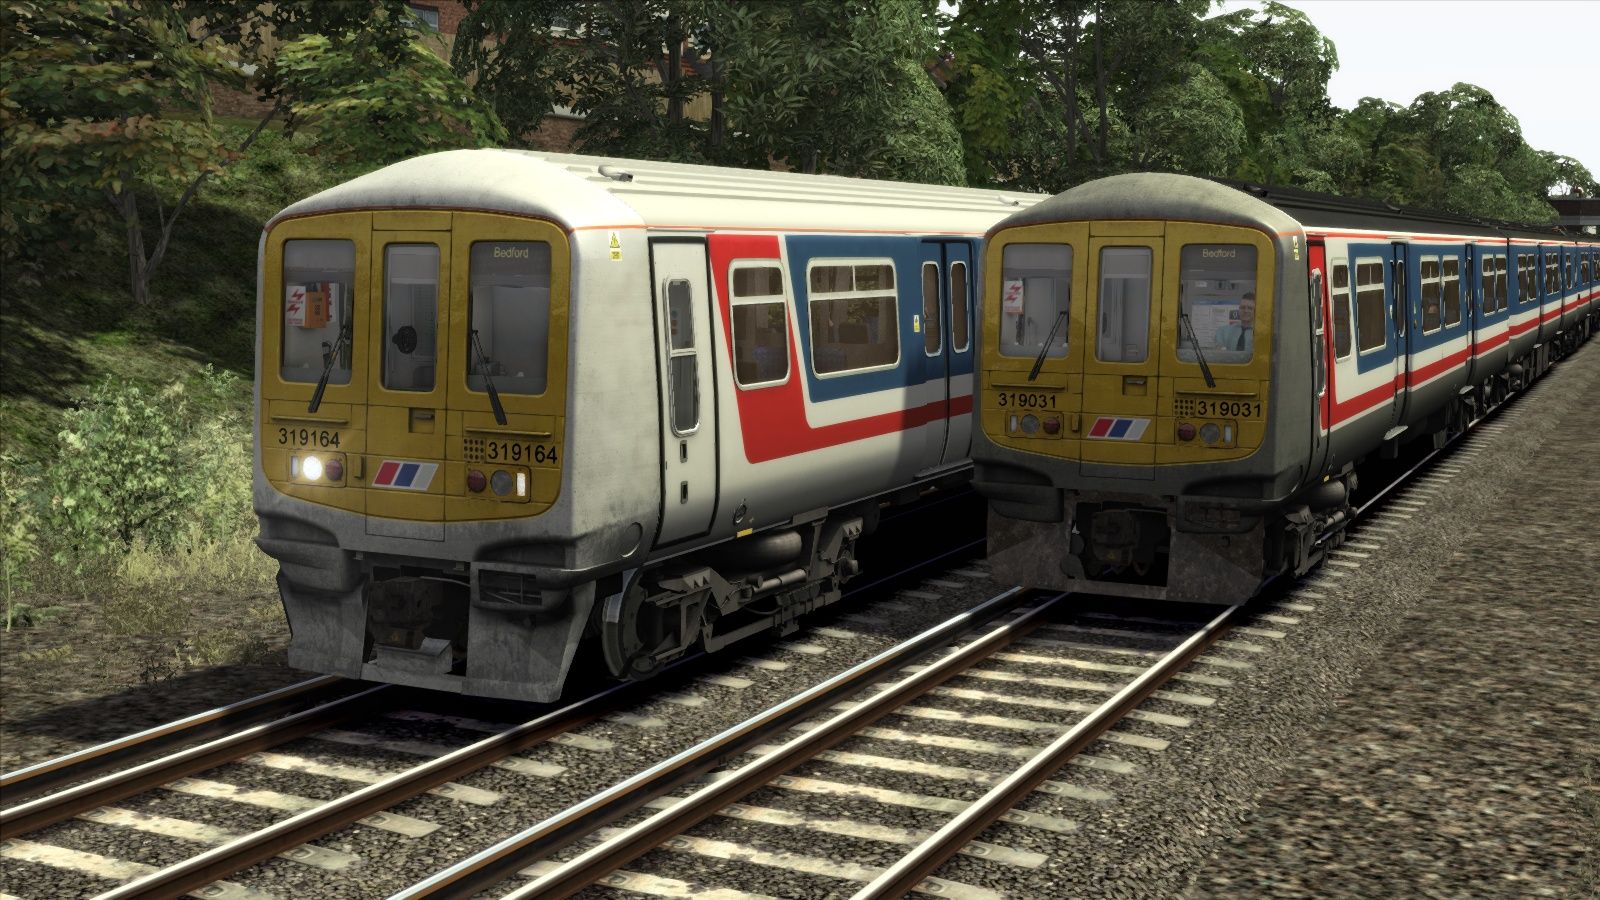 Image showing screenshot of the Network South East Class 319 Add-on Livery on the TS Marketplace